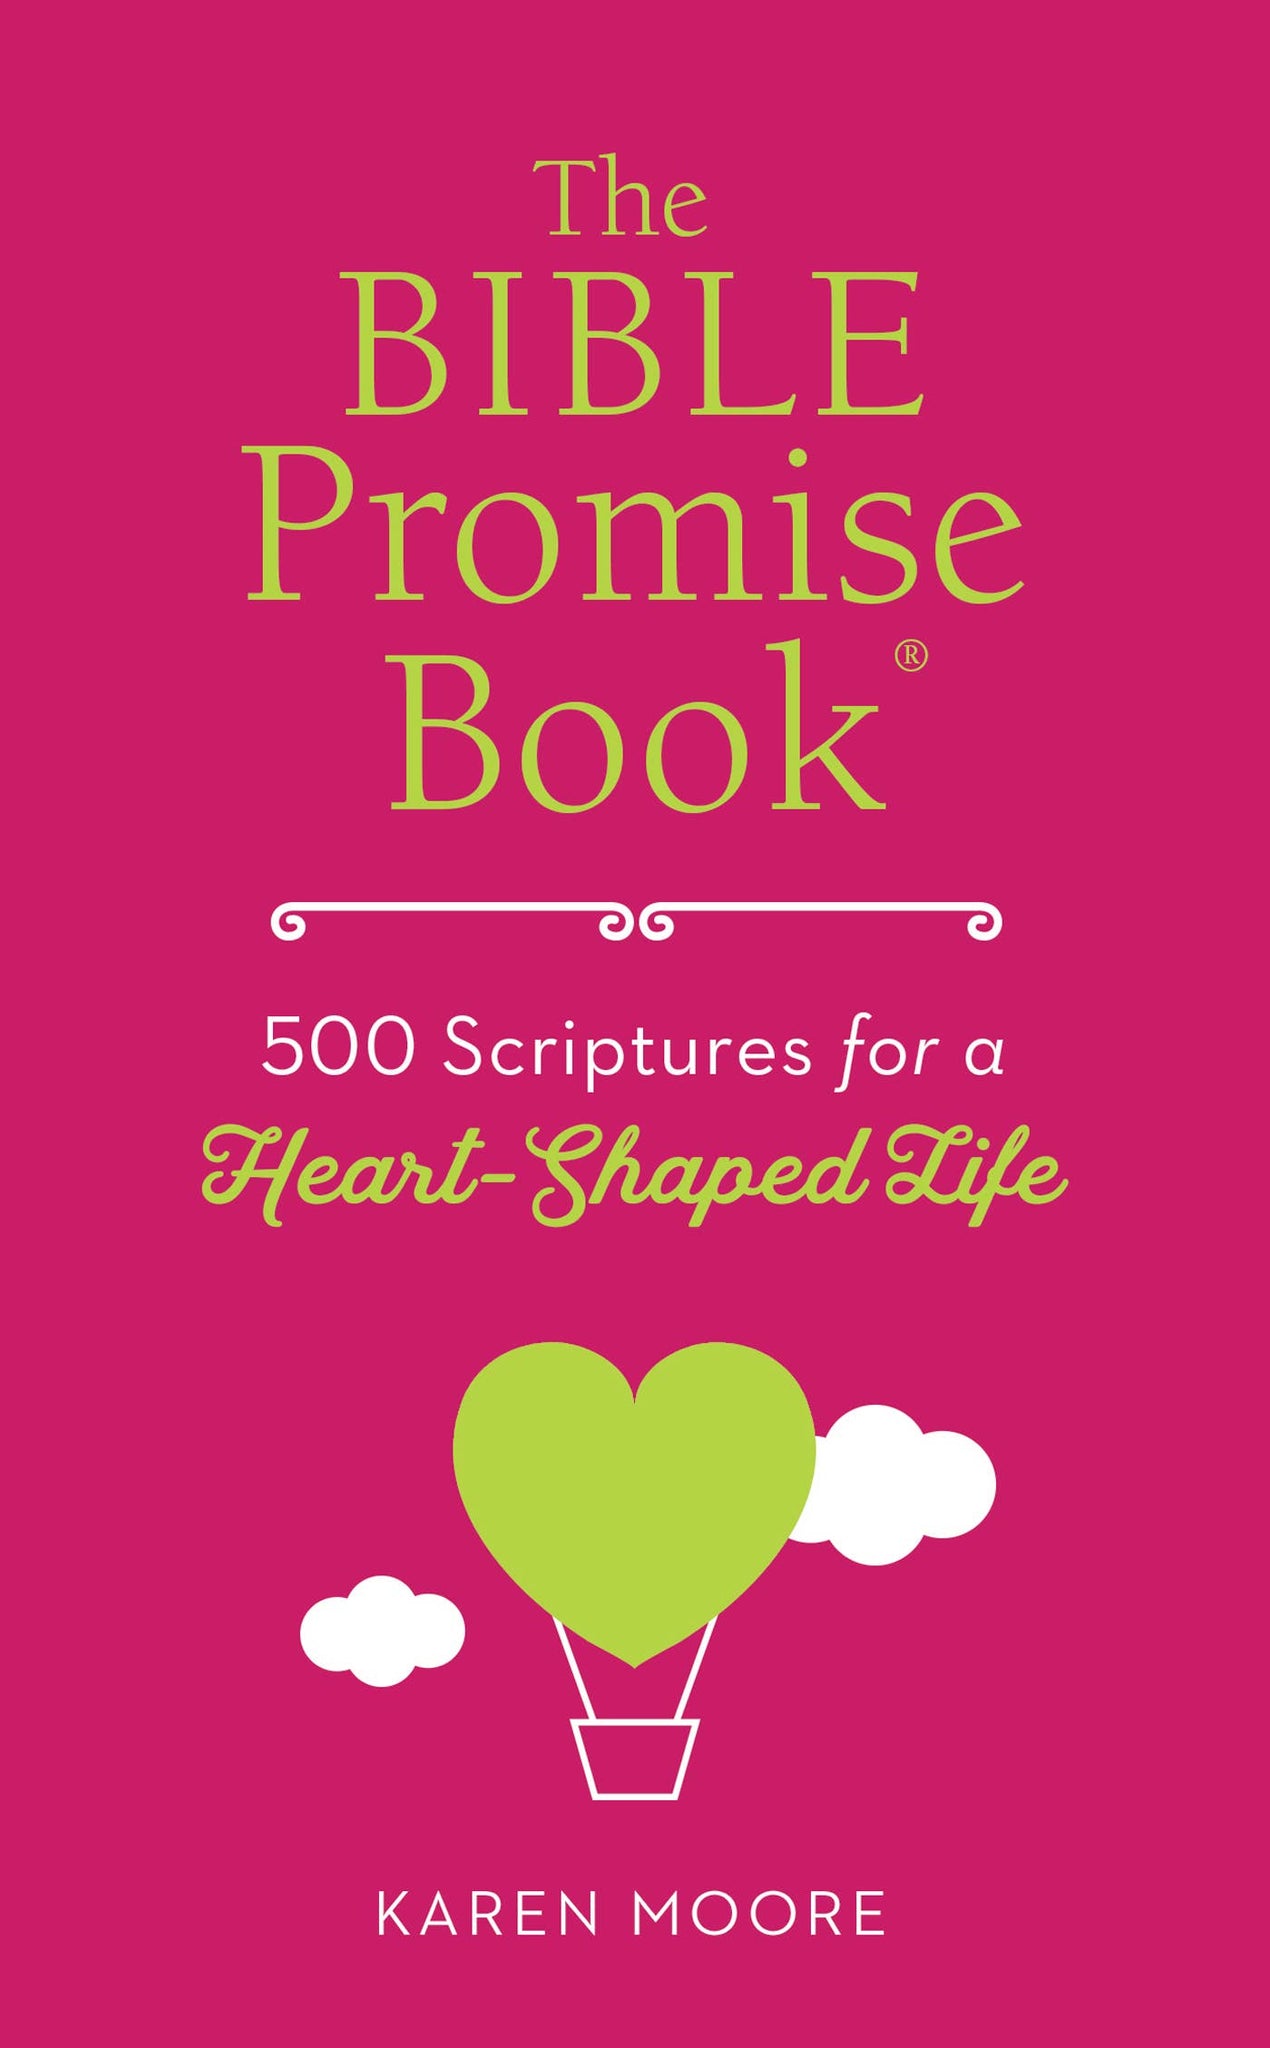 The Bible Promise Book - 500 Scriptures